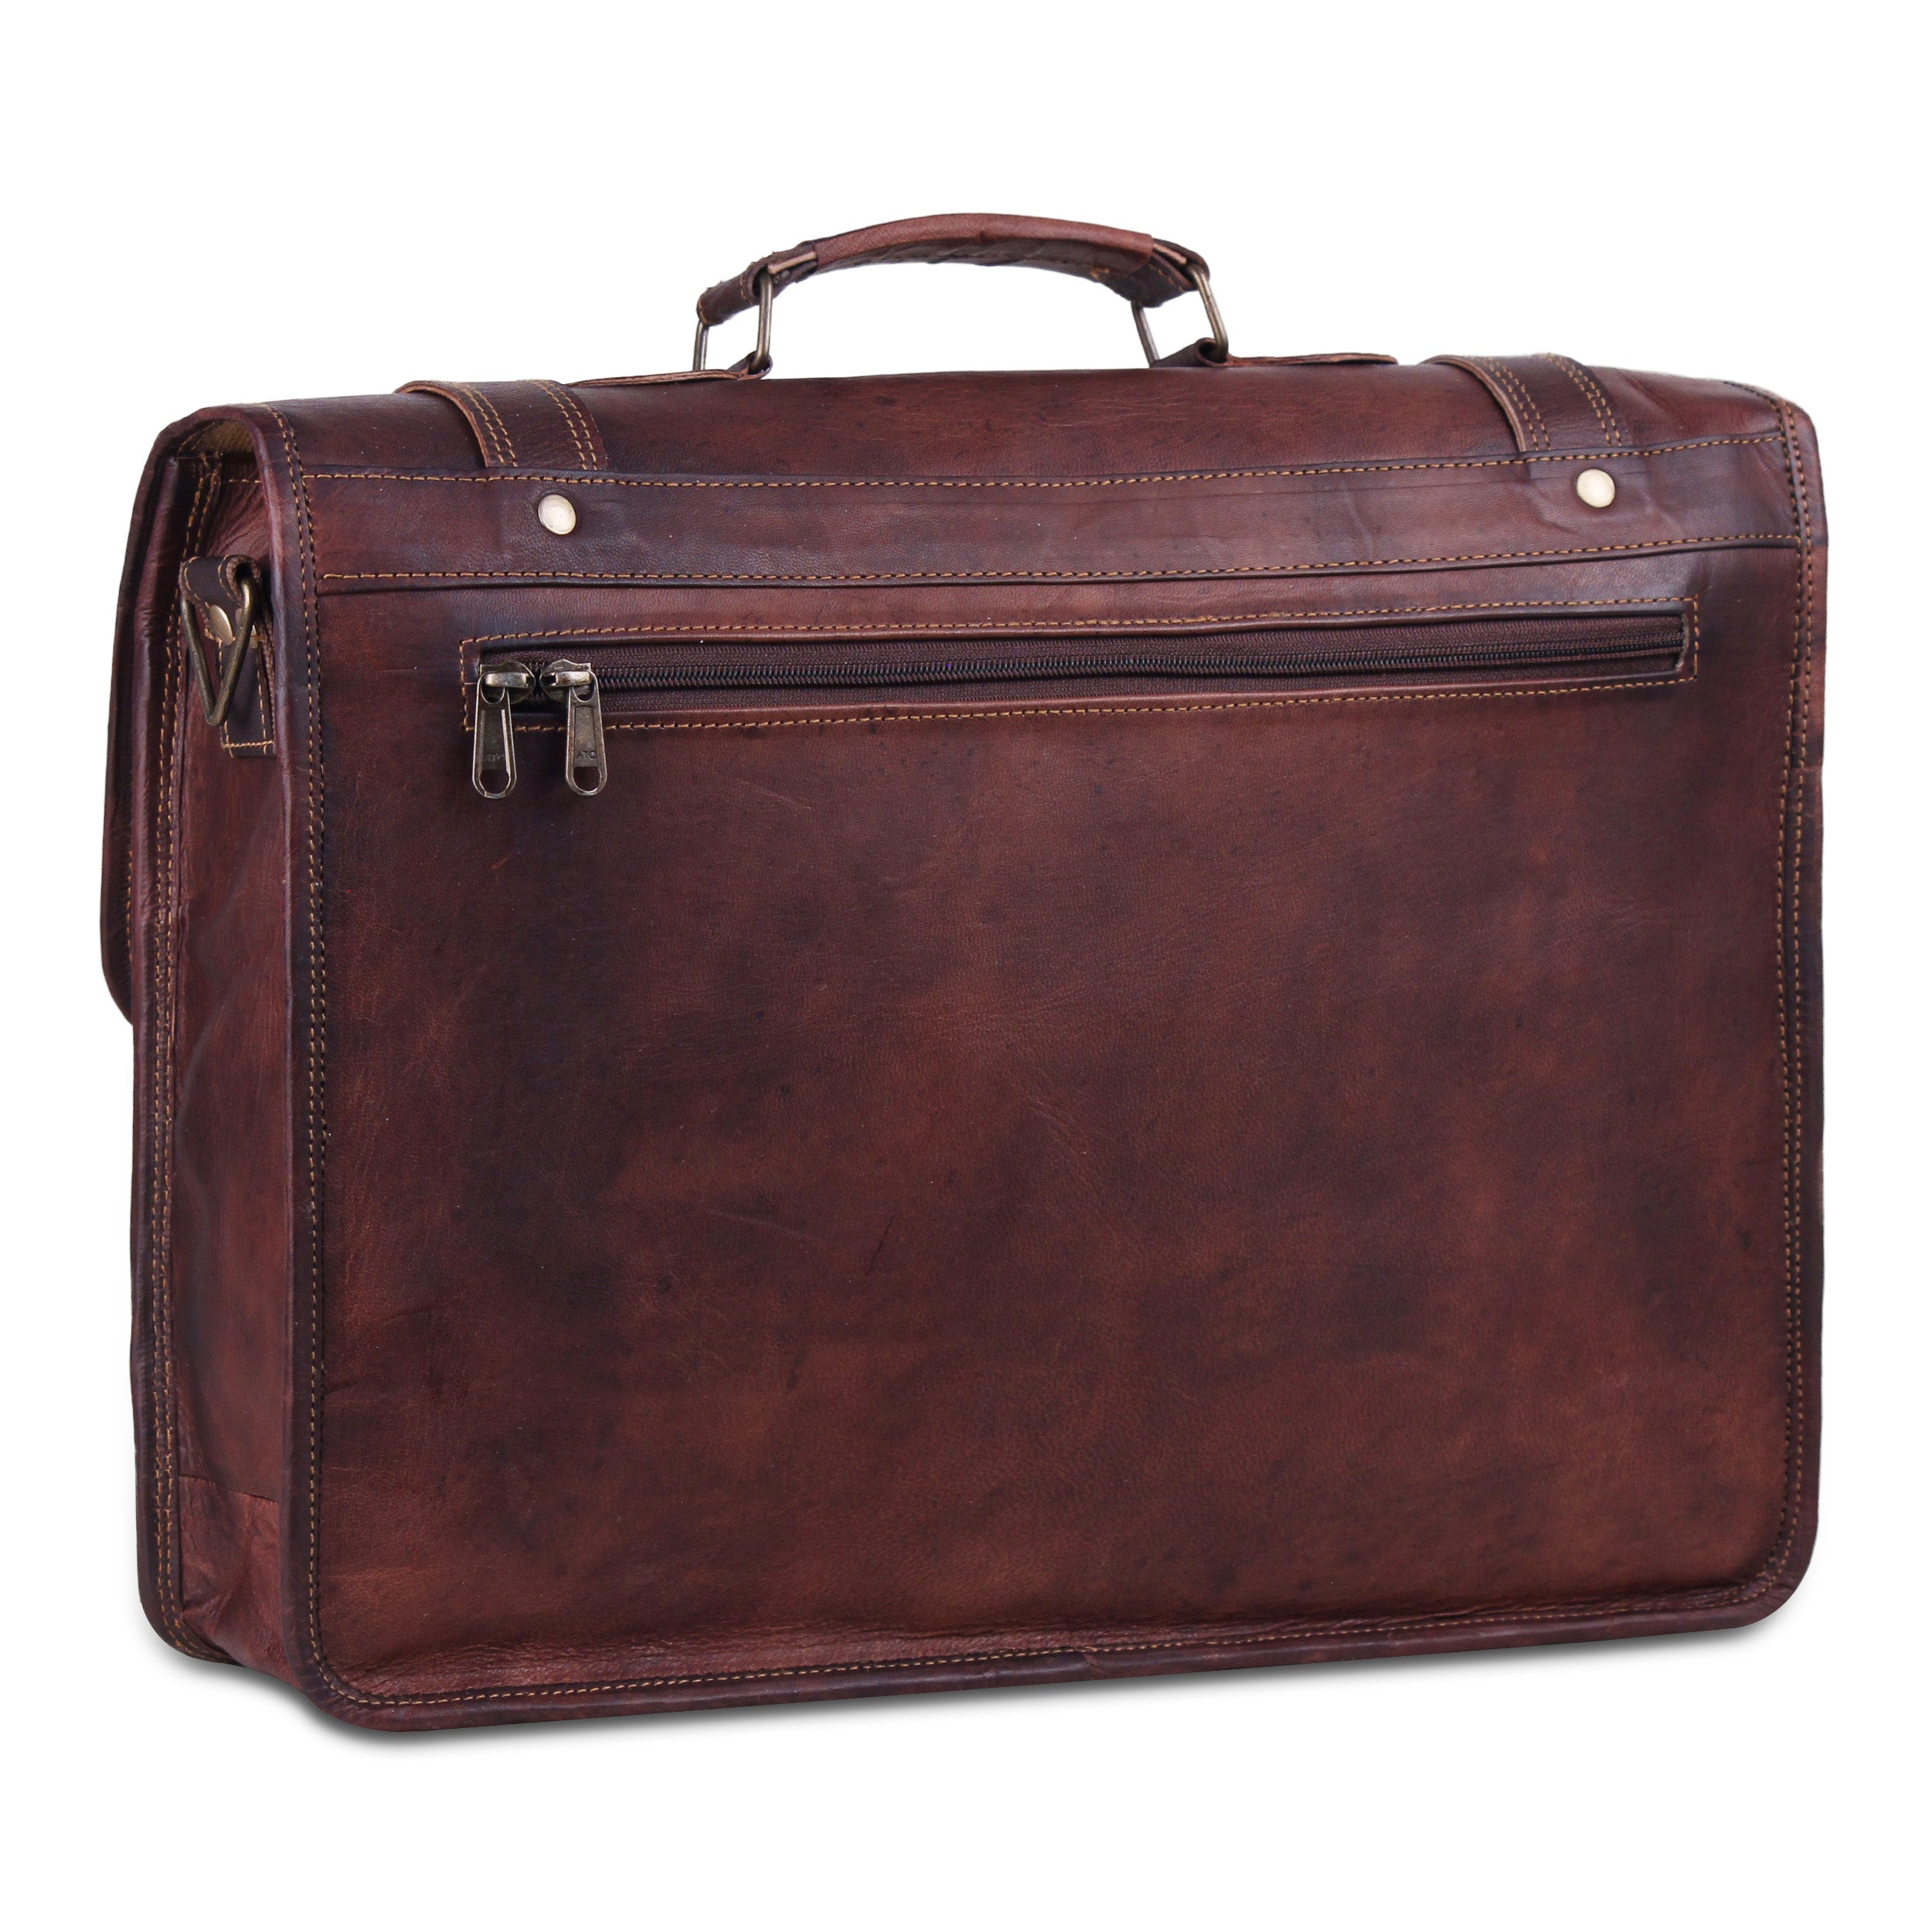 Large Rustic Brown Leather Messenger Briefcase Bag with Top Handle